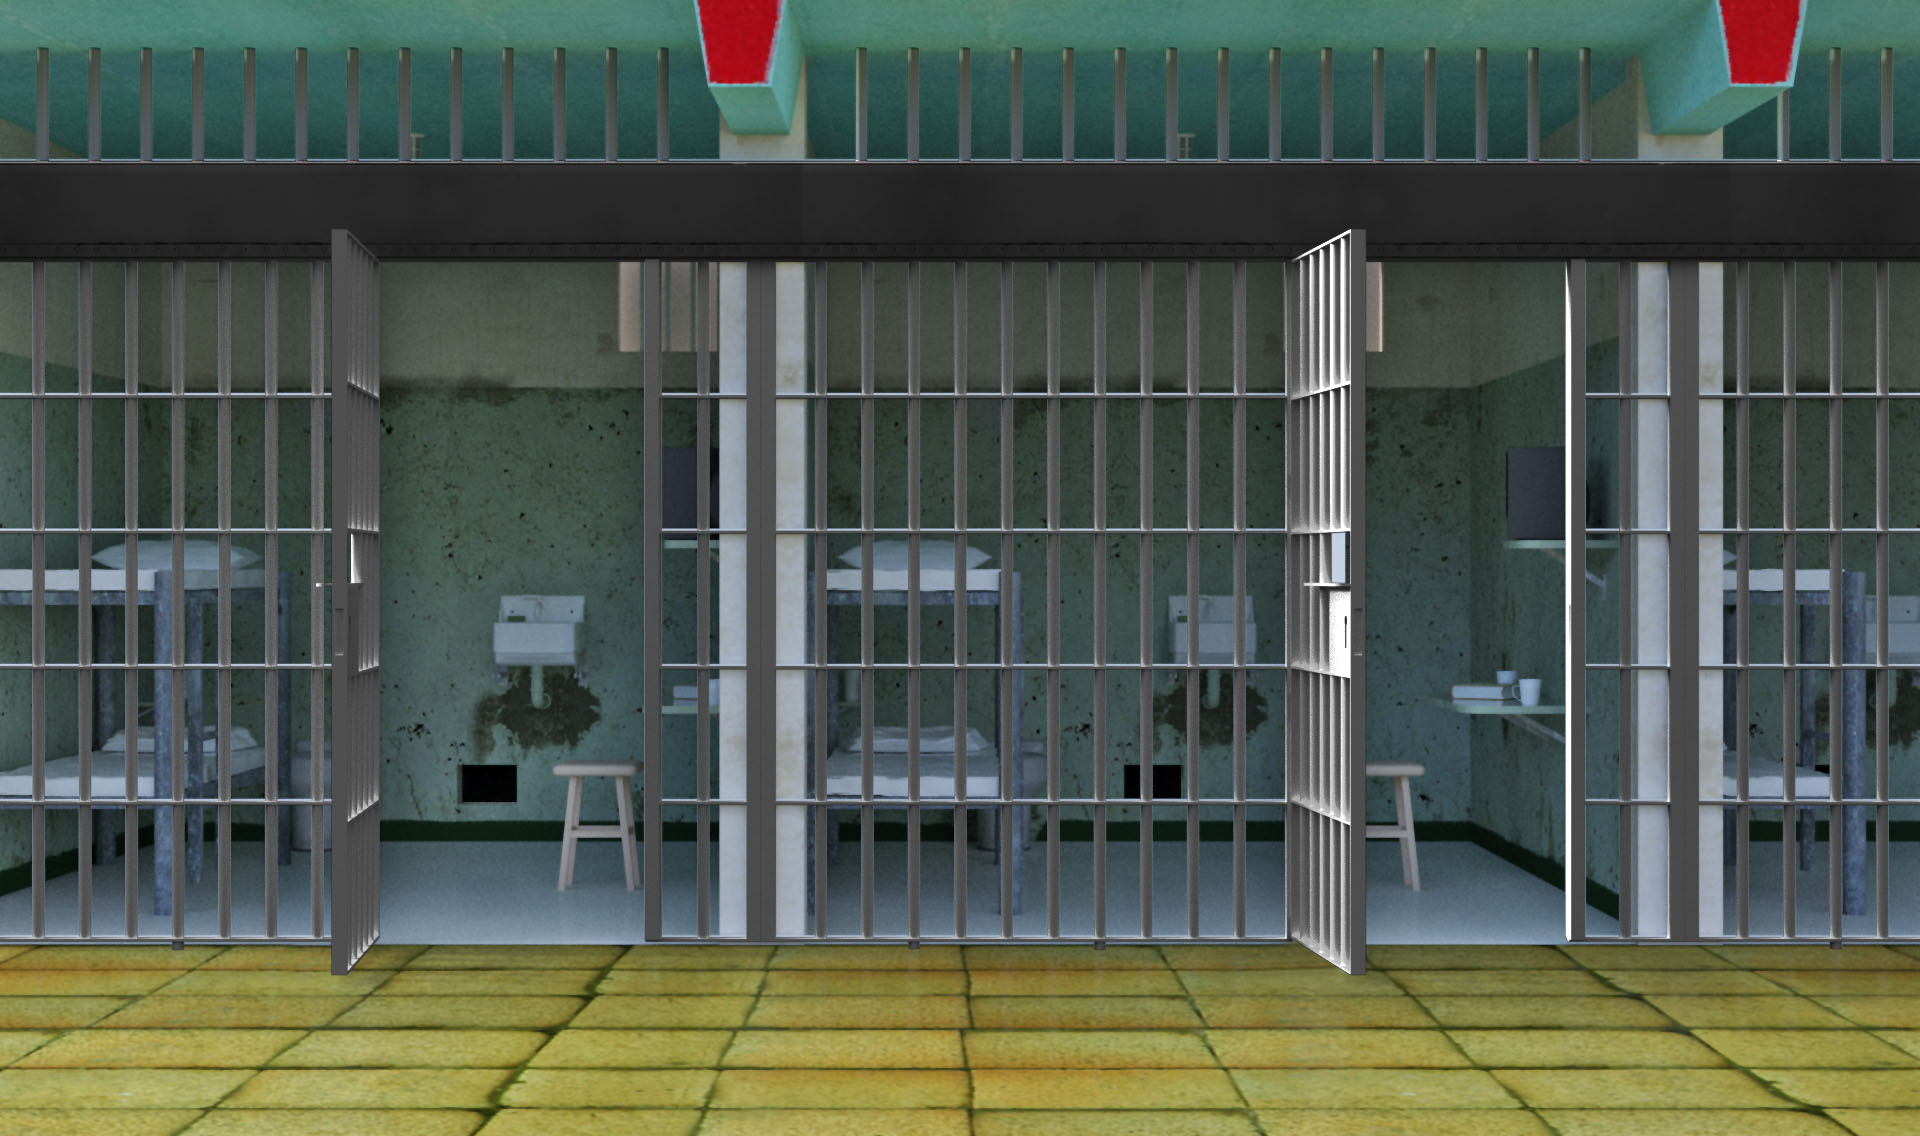 INT. JAIL CELLS OPEN – DAY